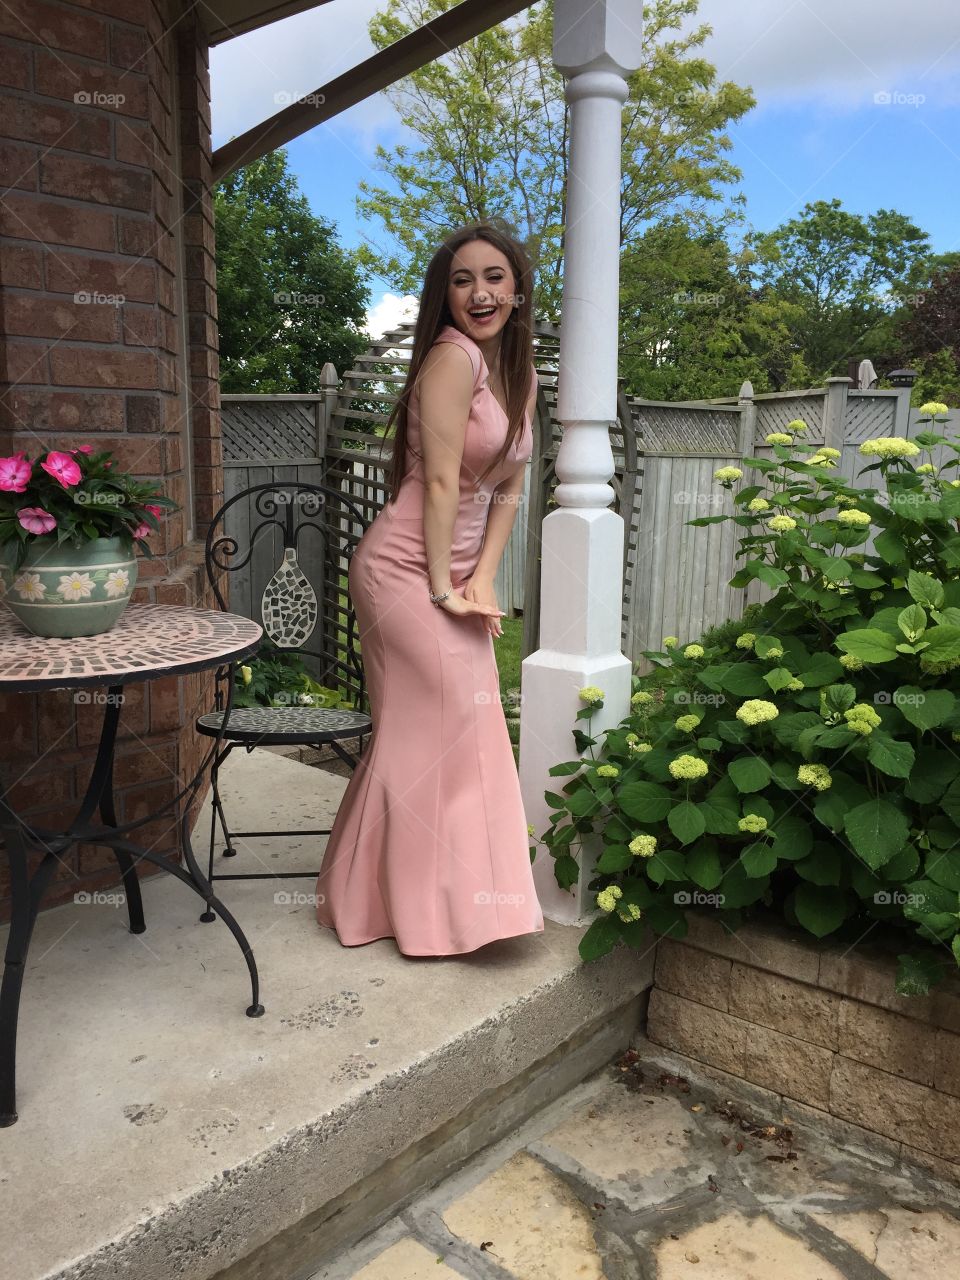 An excited girl on her prom day imitating the famous Marilyn Monroe.